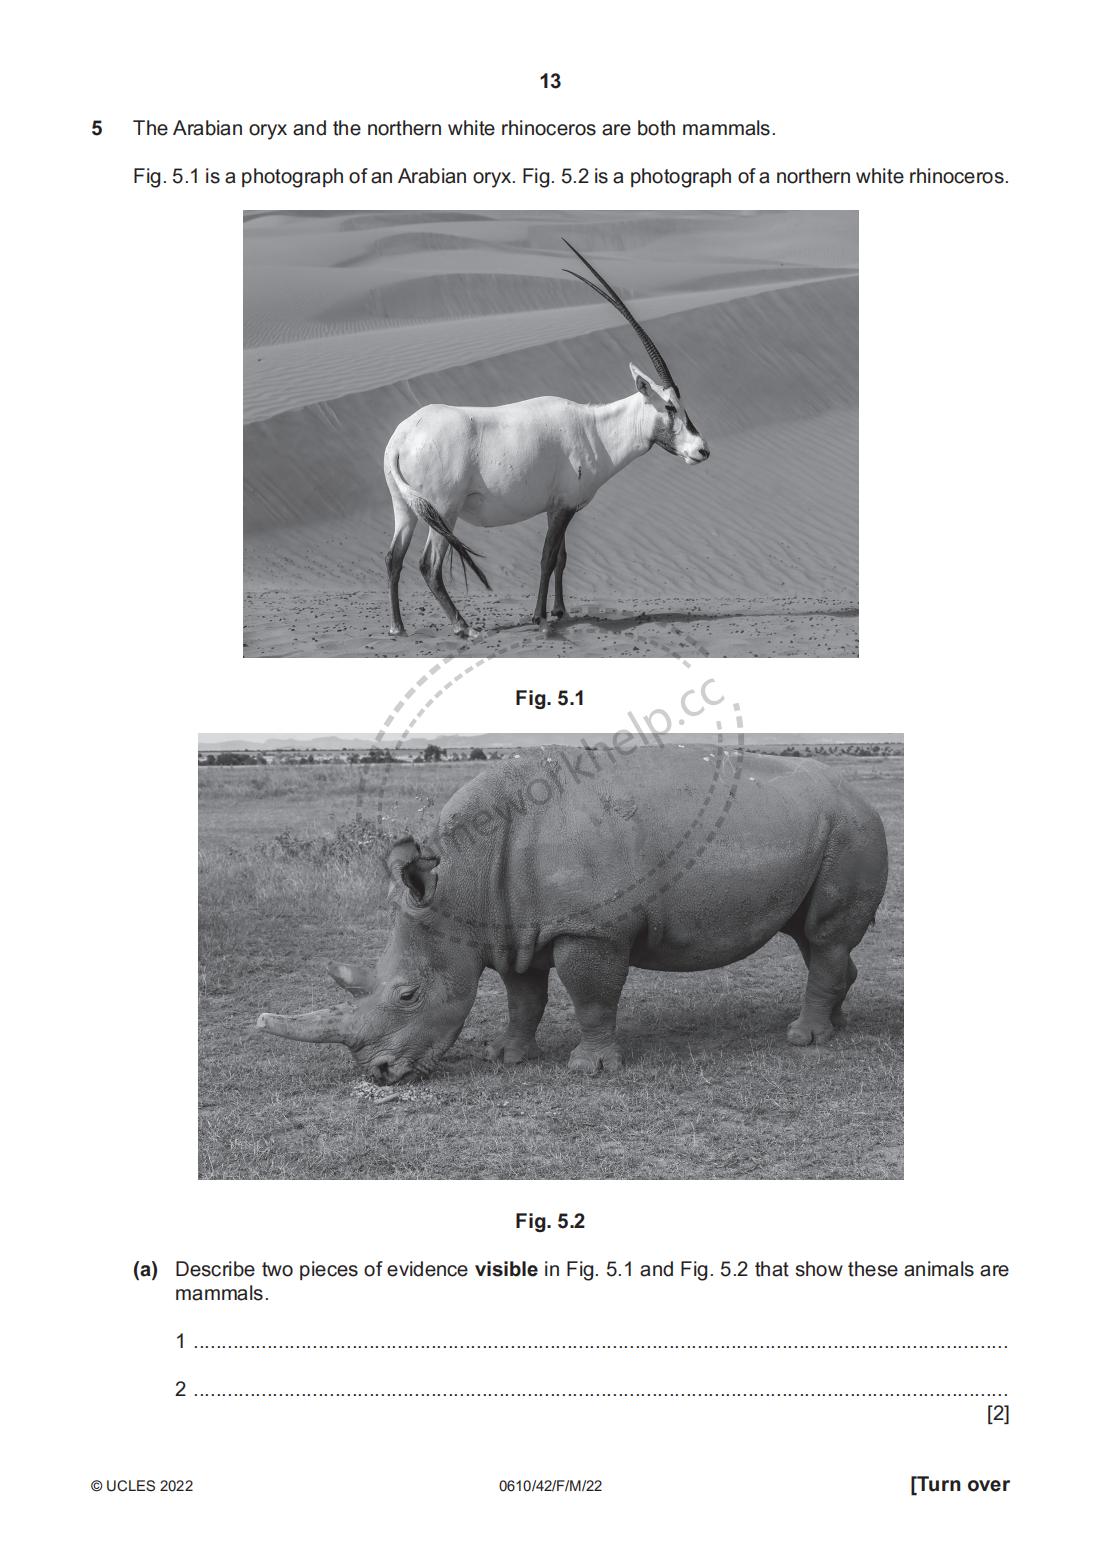 Question-5 The Arabian oryx and the northern white rhinoceros are both mammals